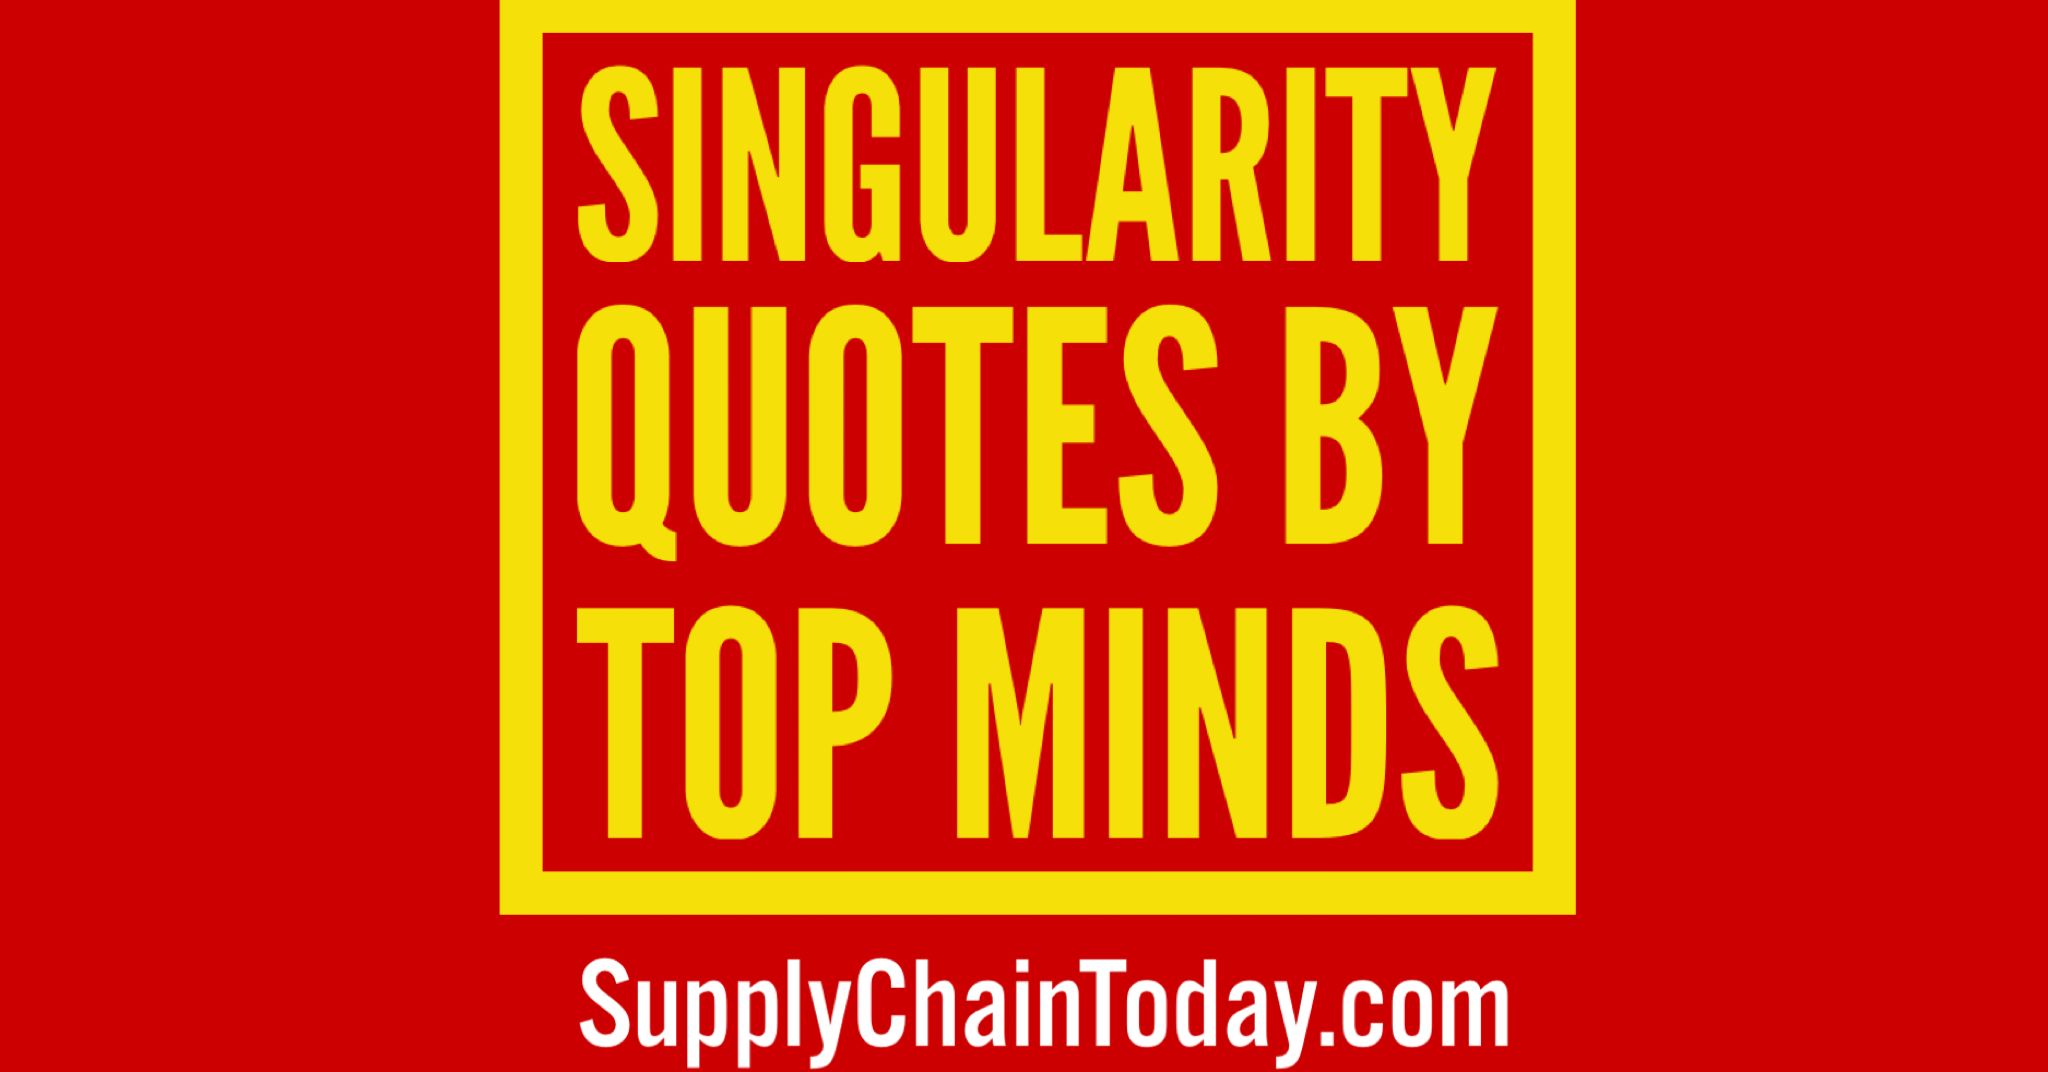 Singularity Quotes by Top Minds. -